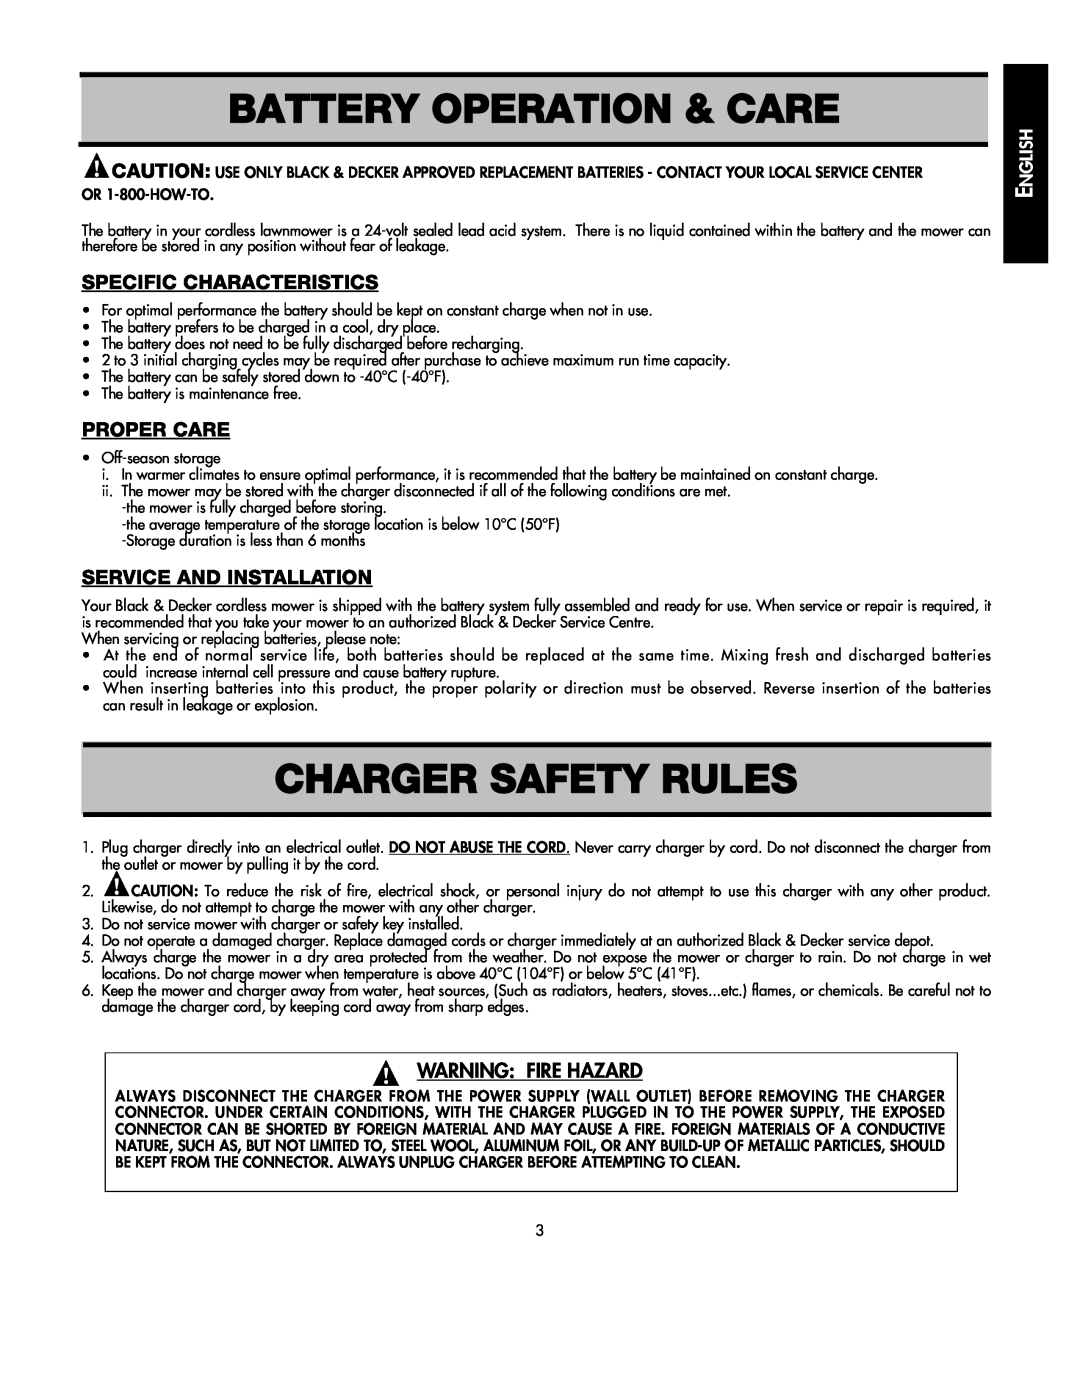 Black & Decker 598968-00 Battery Operation & Care, Charger Safety Rules, Specific Characteristics, Proper Care 